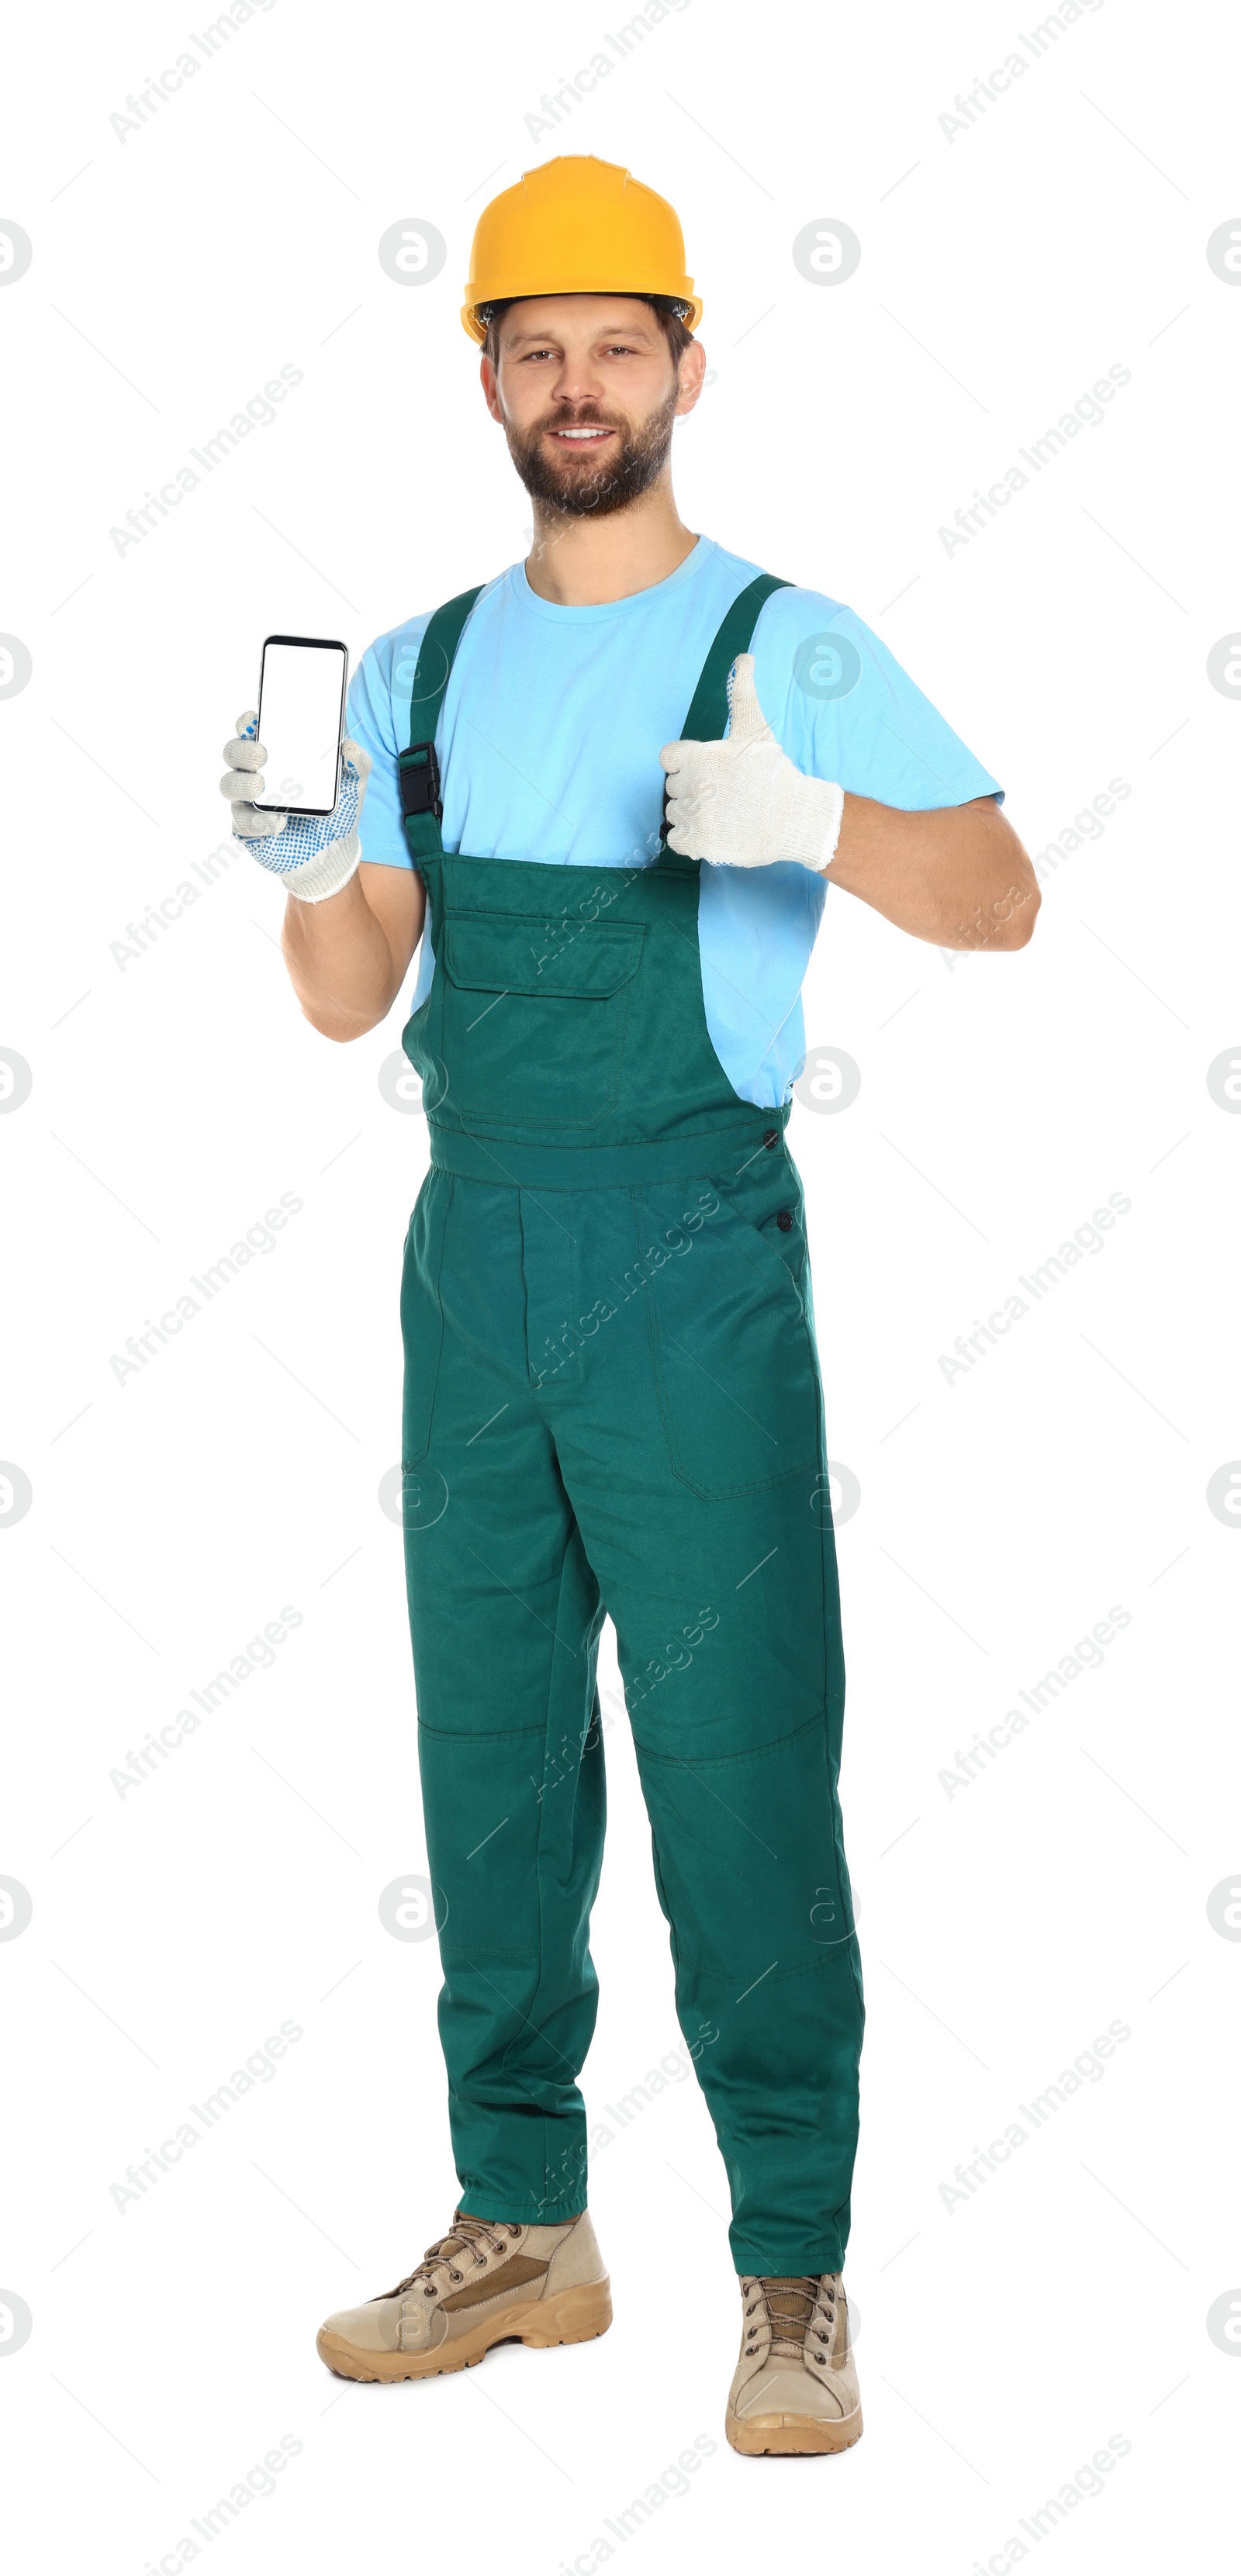 Photo of Professional repairman in uniform showing smartphone and thumbs up on white background